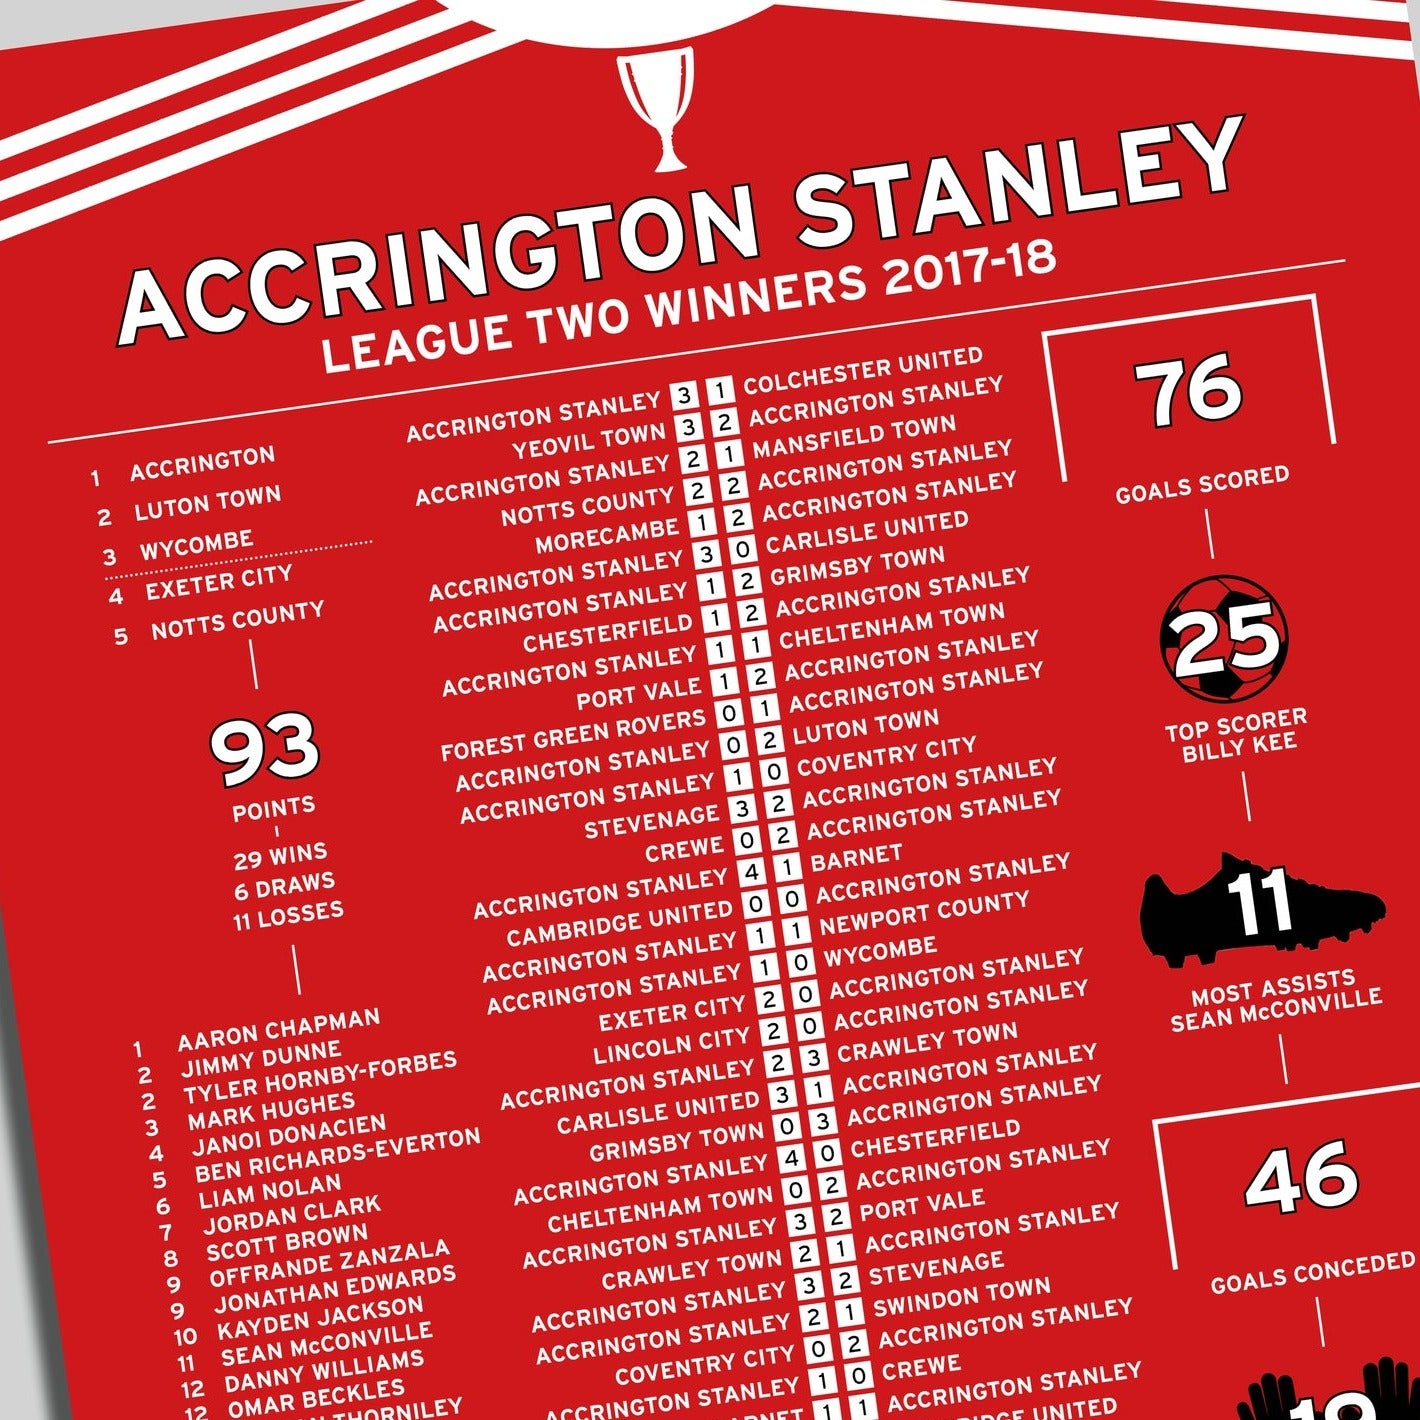 Accrington Stanley 2017-18 League Two Winning Poster